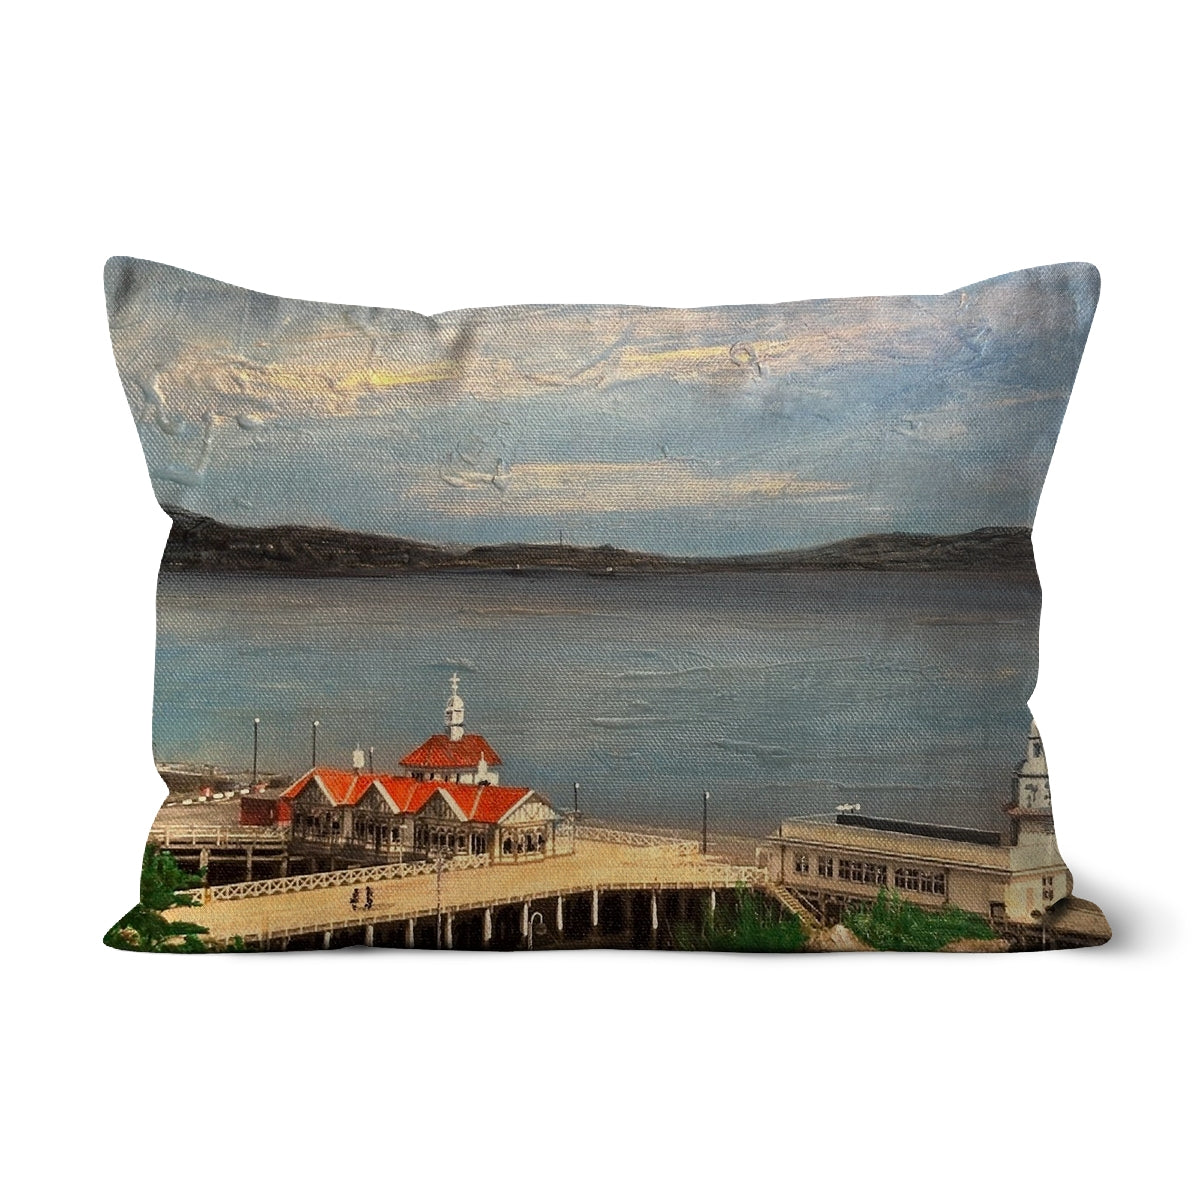 Looking From Dunoon Art Gifts Cushion-Cushions-River Clyde Art Gallery-Faux Suede-19"x13"-Paintings, Prints, Homeware, Art Gifts From Scotland By Scottish Artist Kevin Hunter